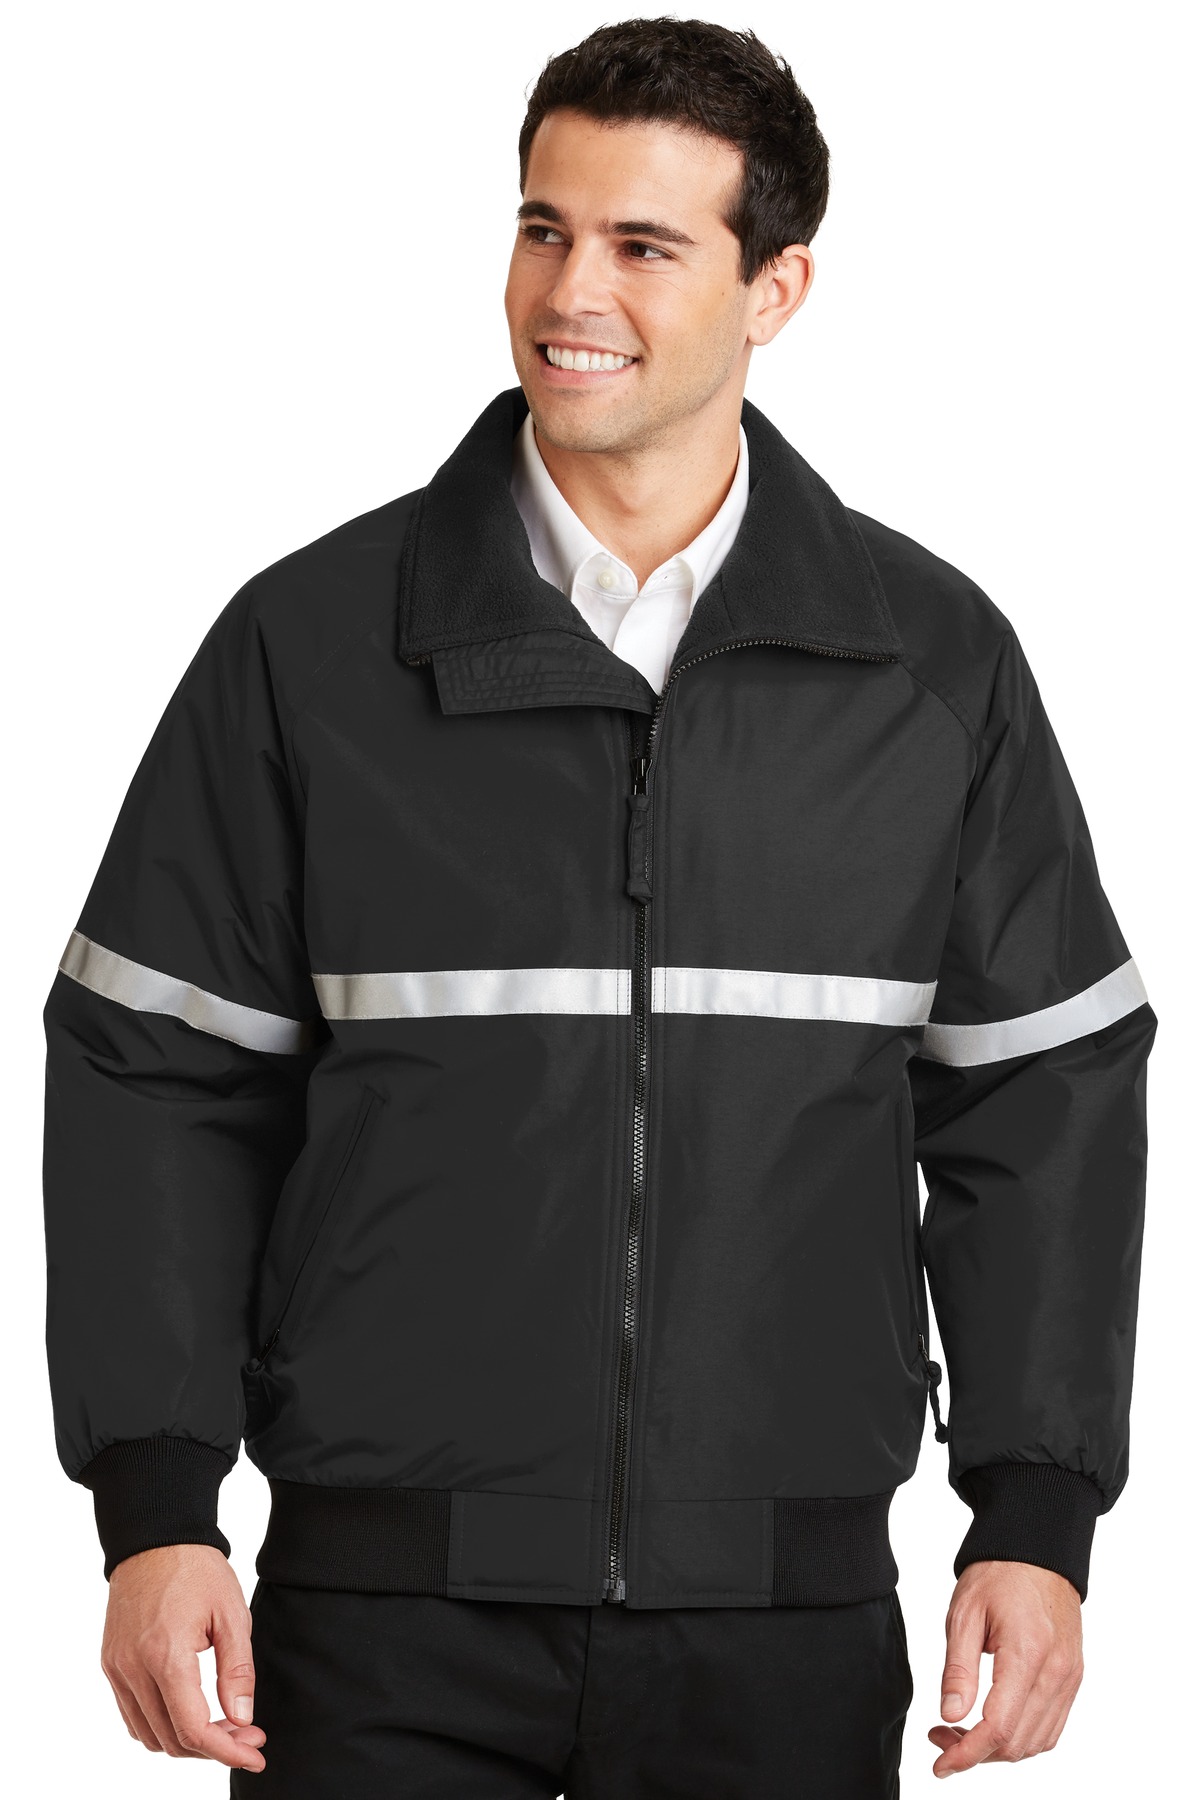 Port Authority Challenger Jacket with Reflective Taping-Port Authority